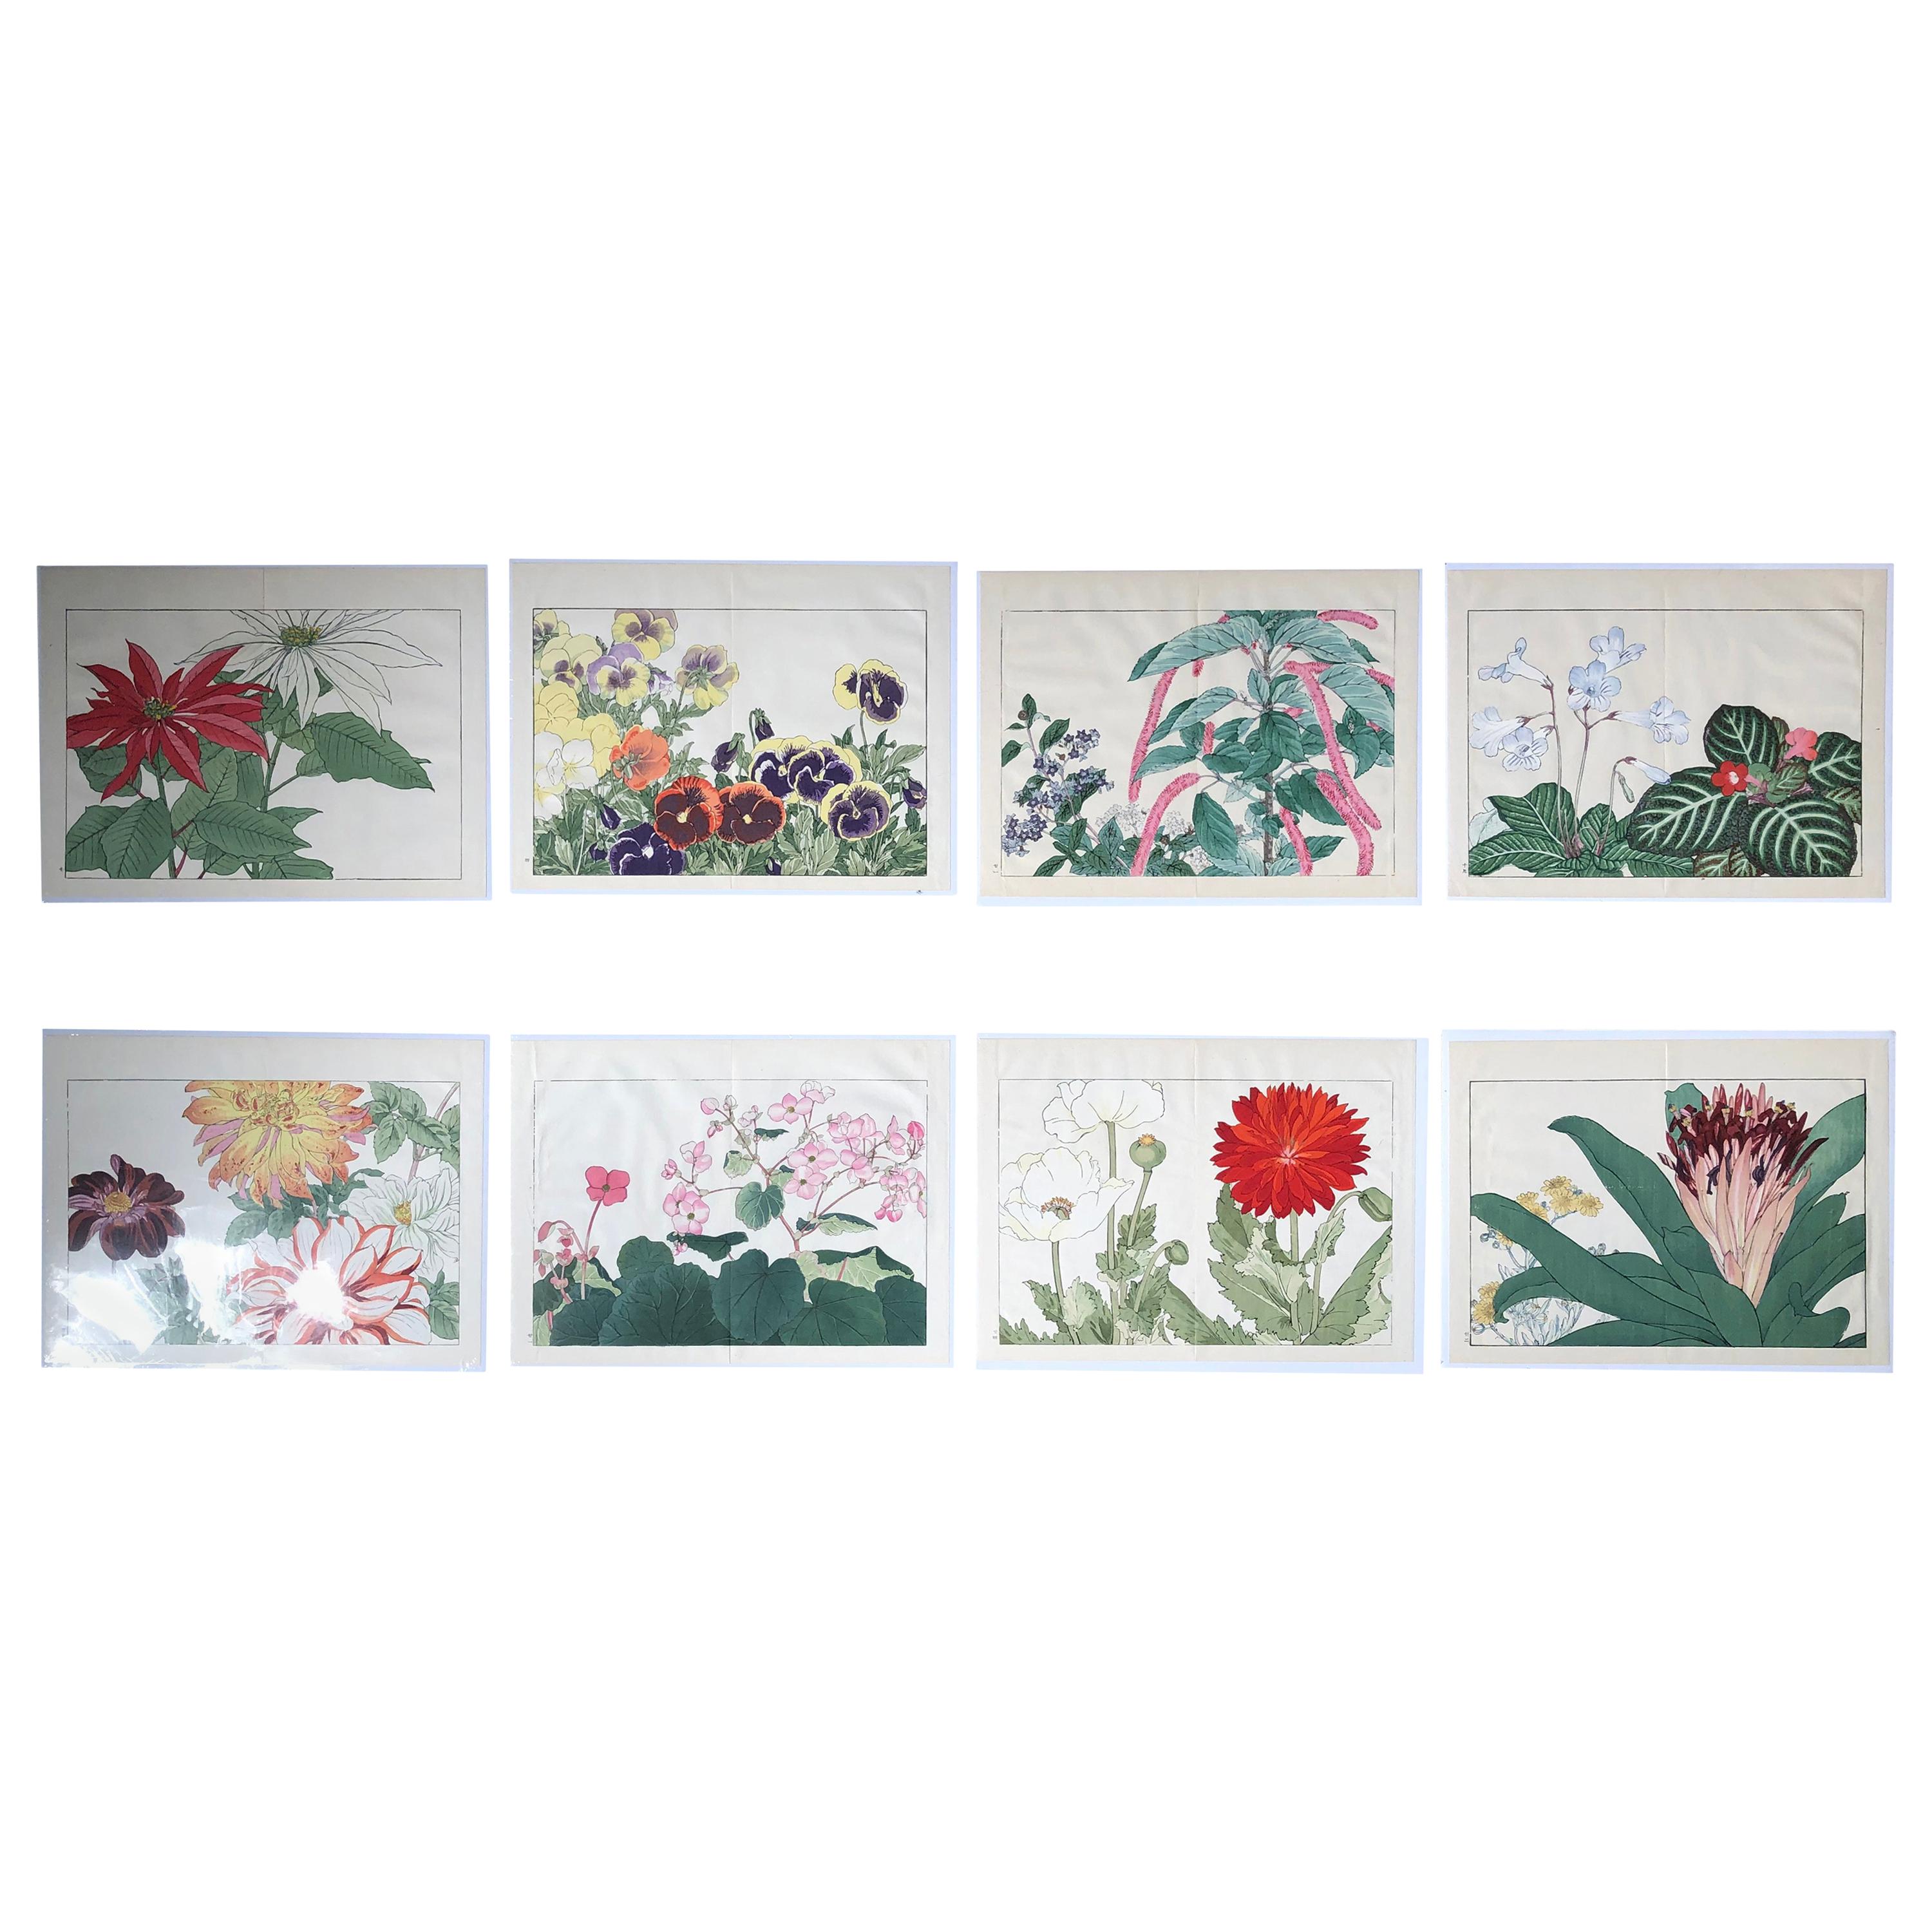 Japanese Eight Old Woodblock Flower Prints, Superb Colors, Immed Frameable #2